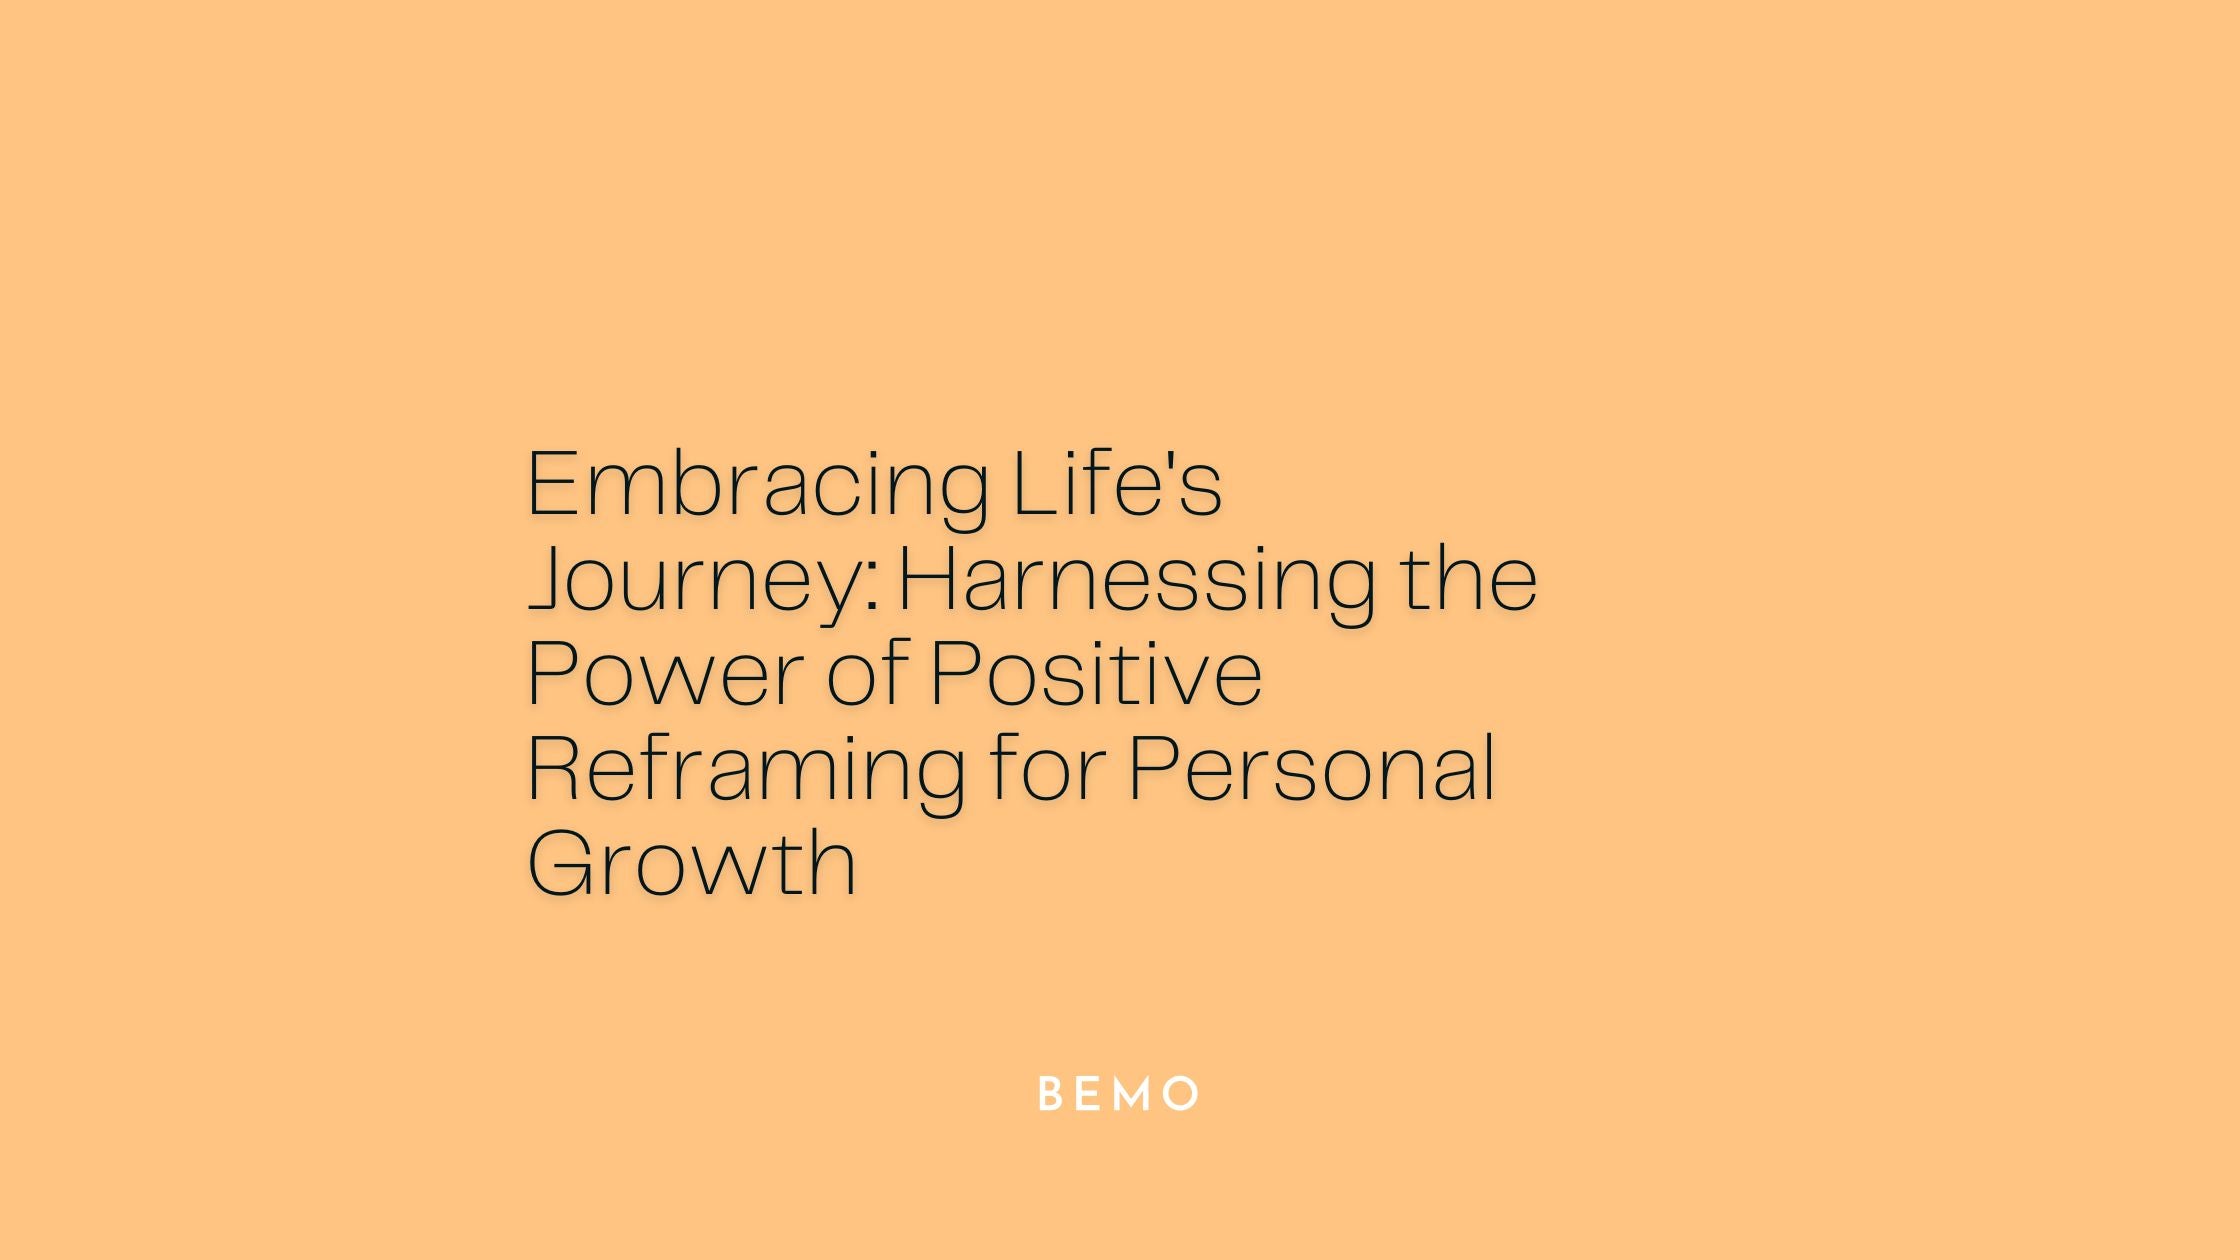 Embracing Life's Journey: Harnessing the Power of Positive Reframing for Personal Growth